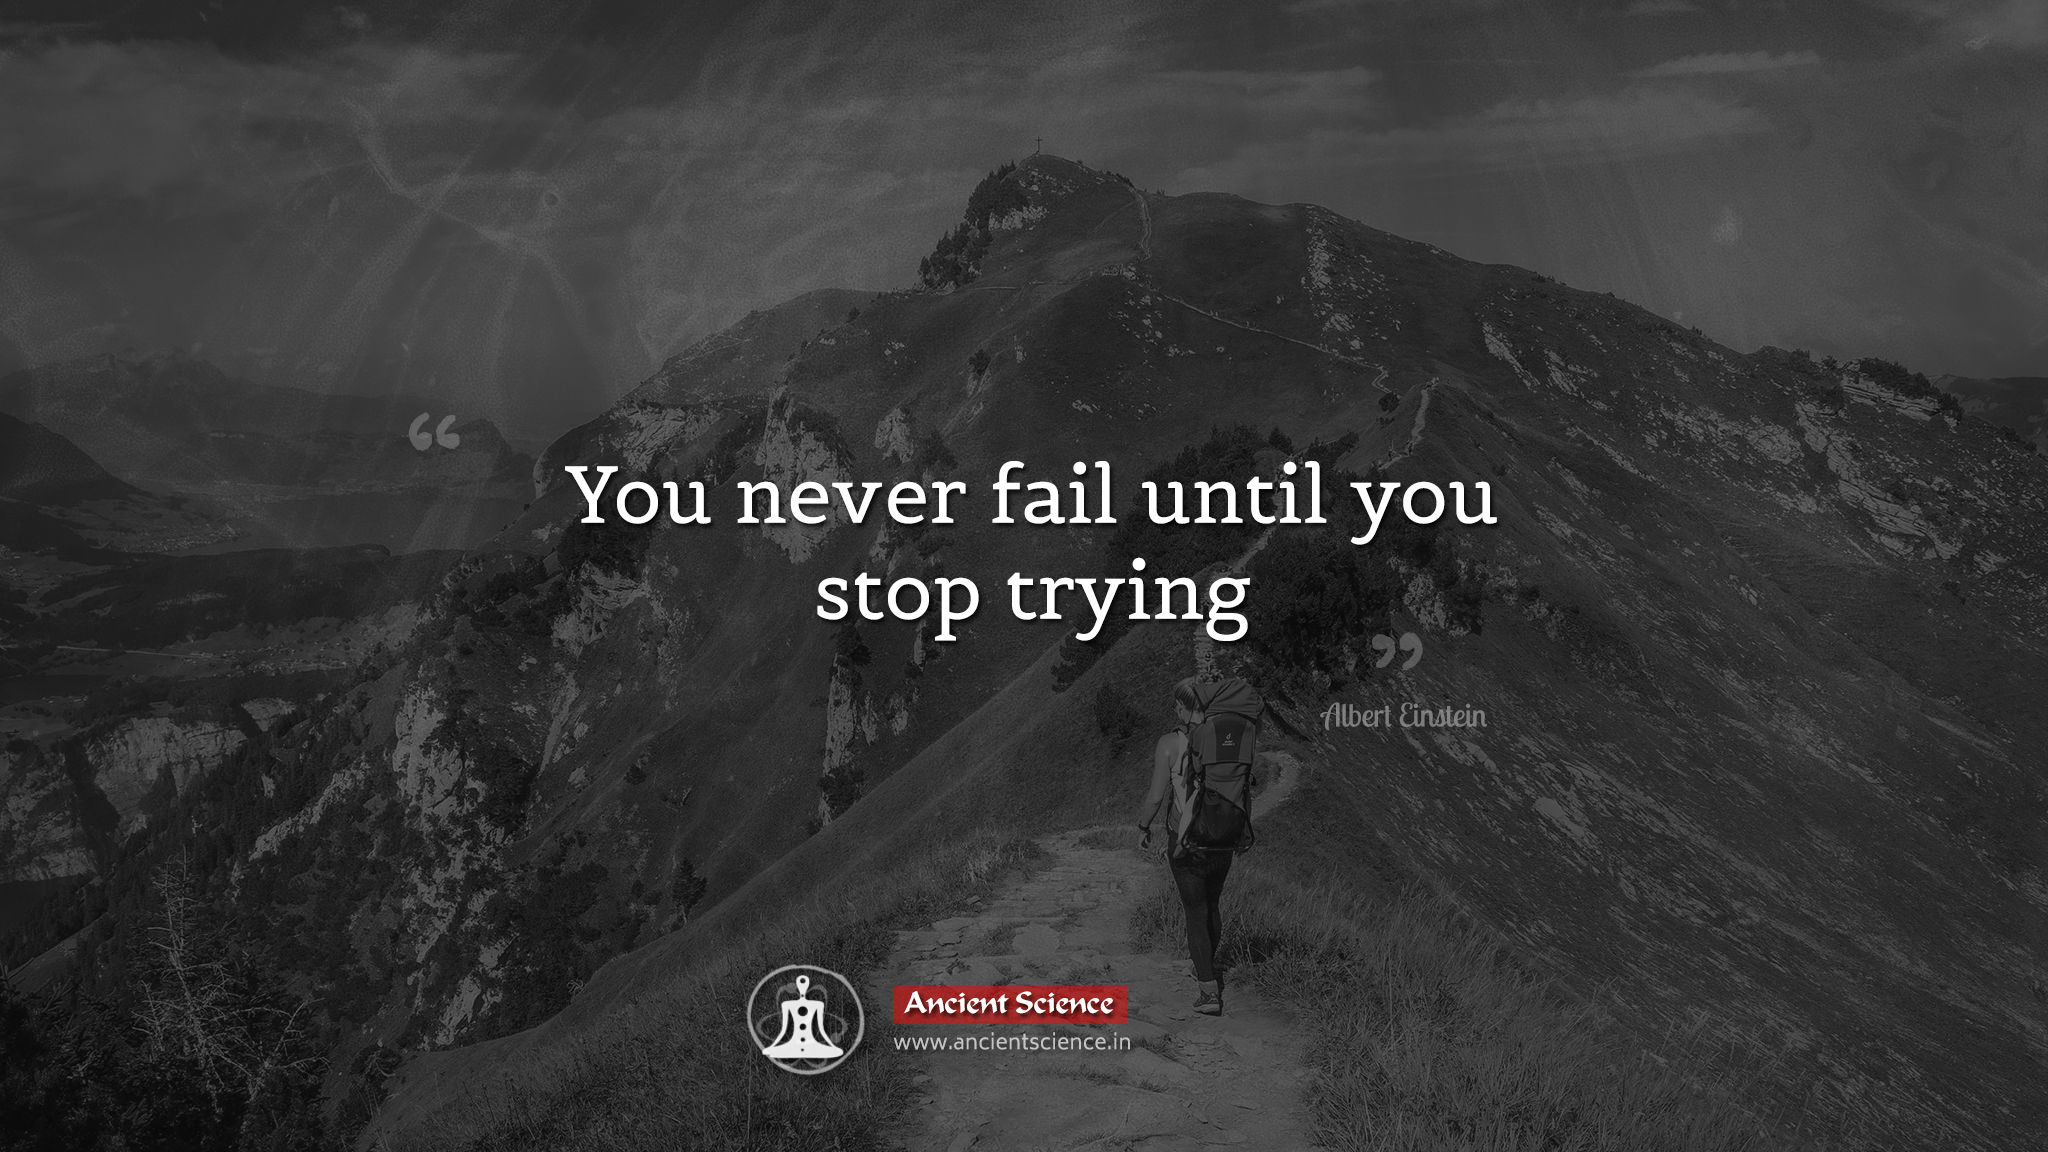 You never fail until you stop trying.